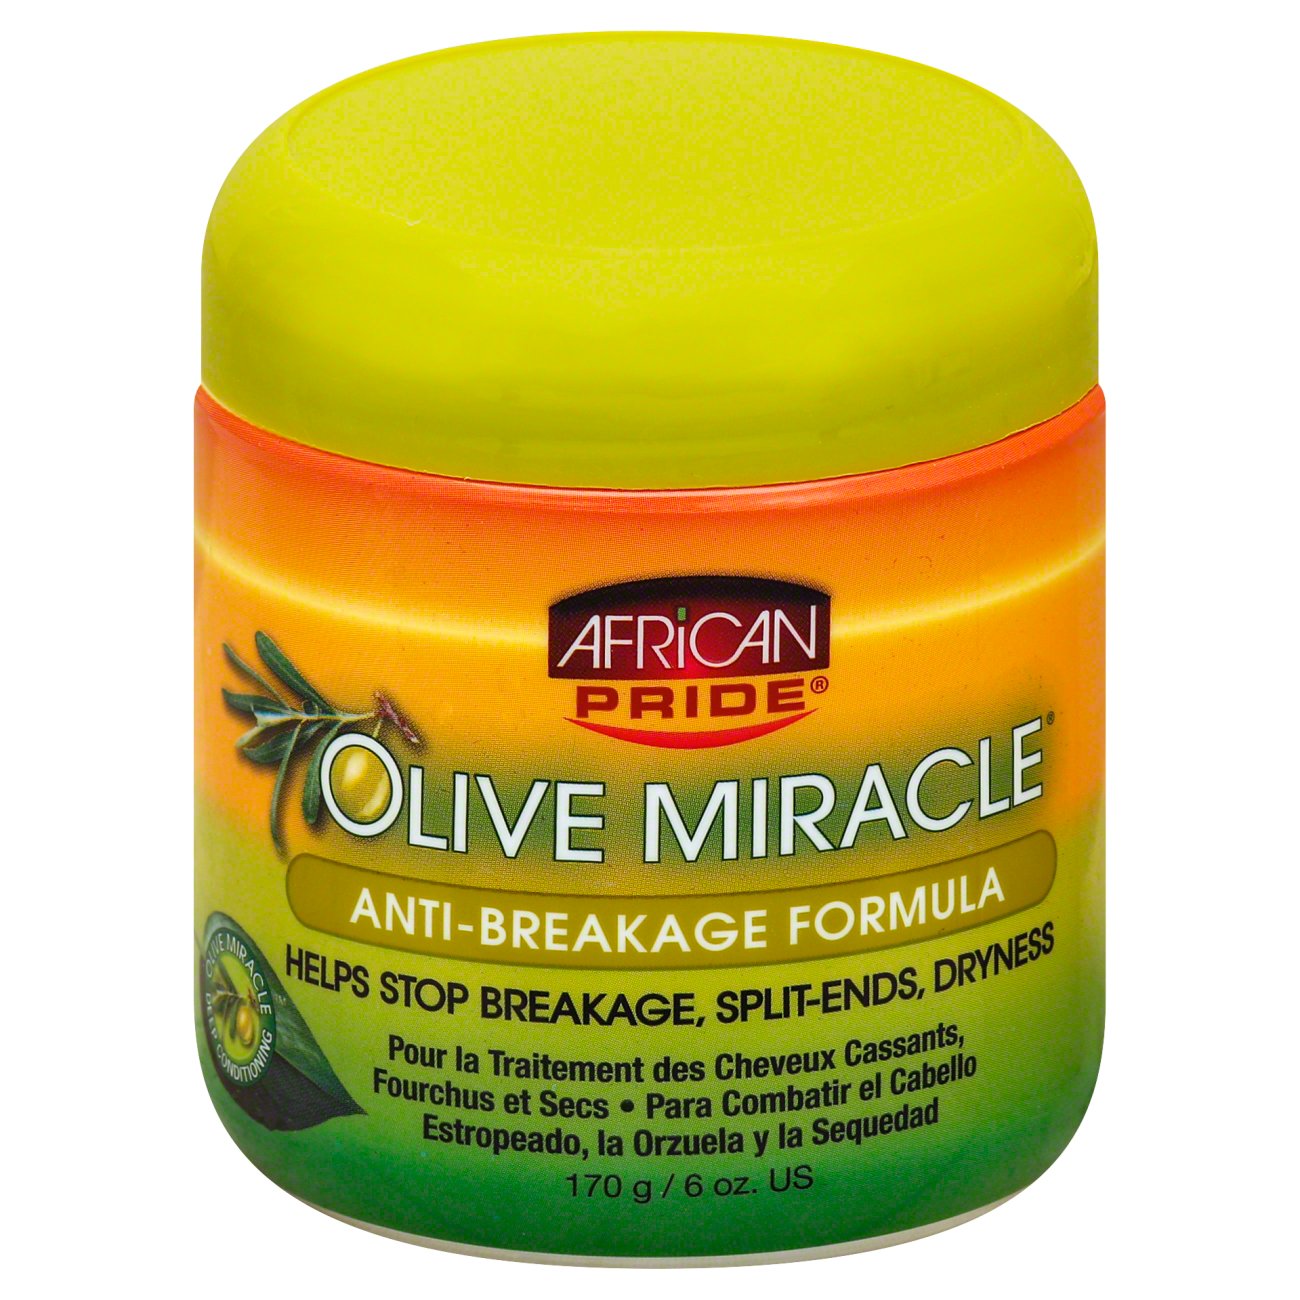 Olive Miracle Anti Breakage Formula | visitchile.cl